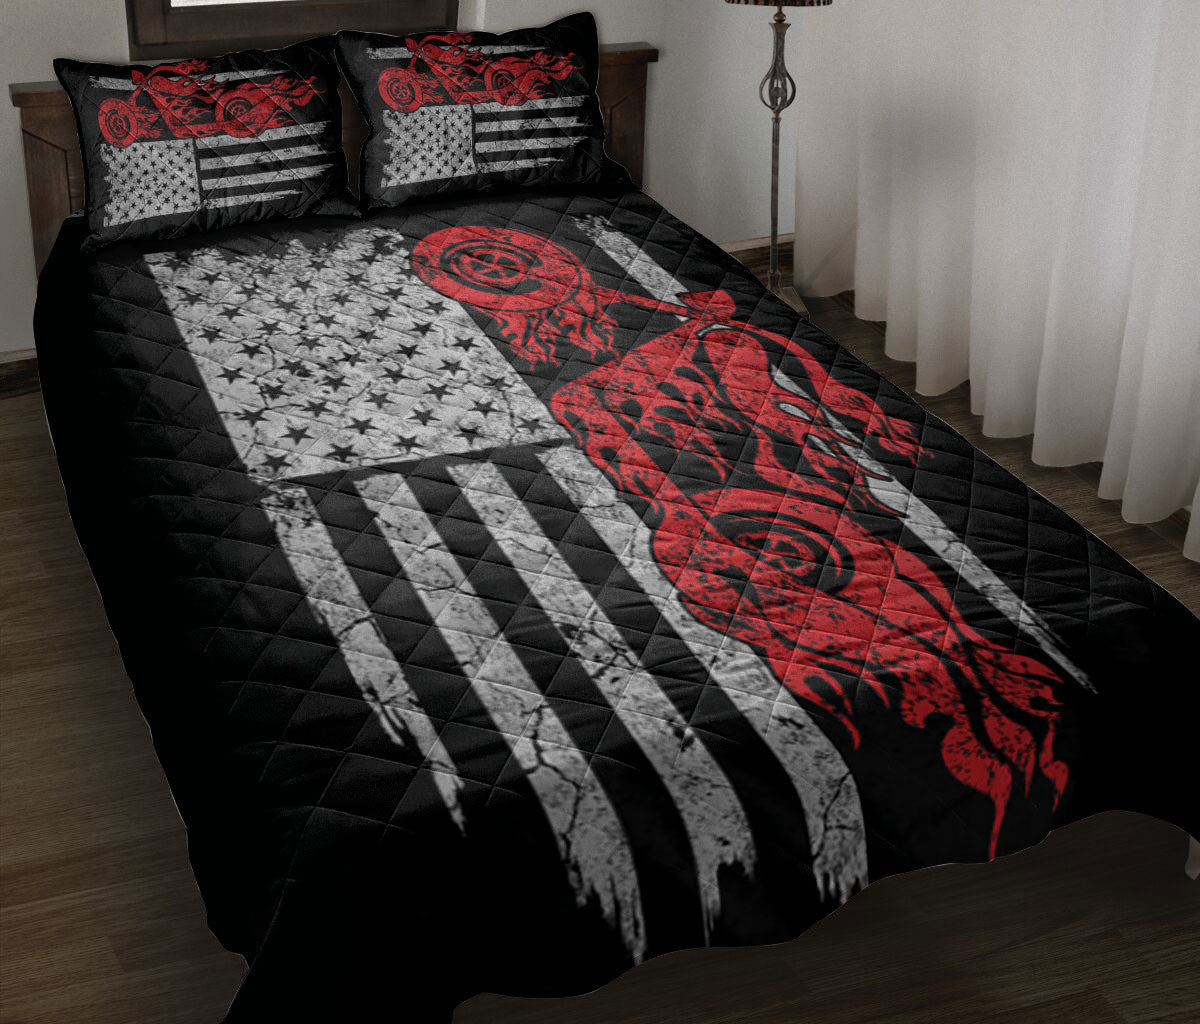 Ohaprints-Quilt-Bed-Set-Pillowcase-Motorcycle-Red-Flame-Biker-American-Us-Flag-Gift-For-Biker-Blanket-Bedspread-Bedding-233-Throw (55'' x 60'')